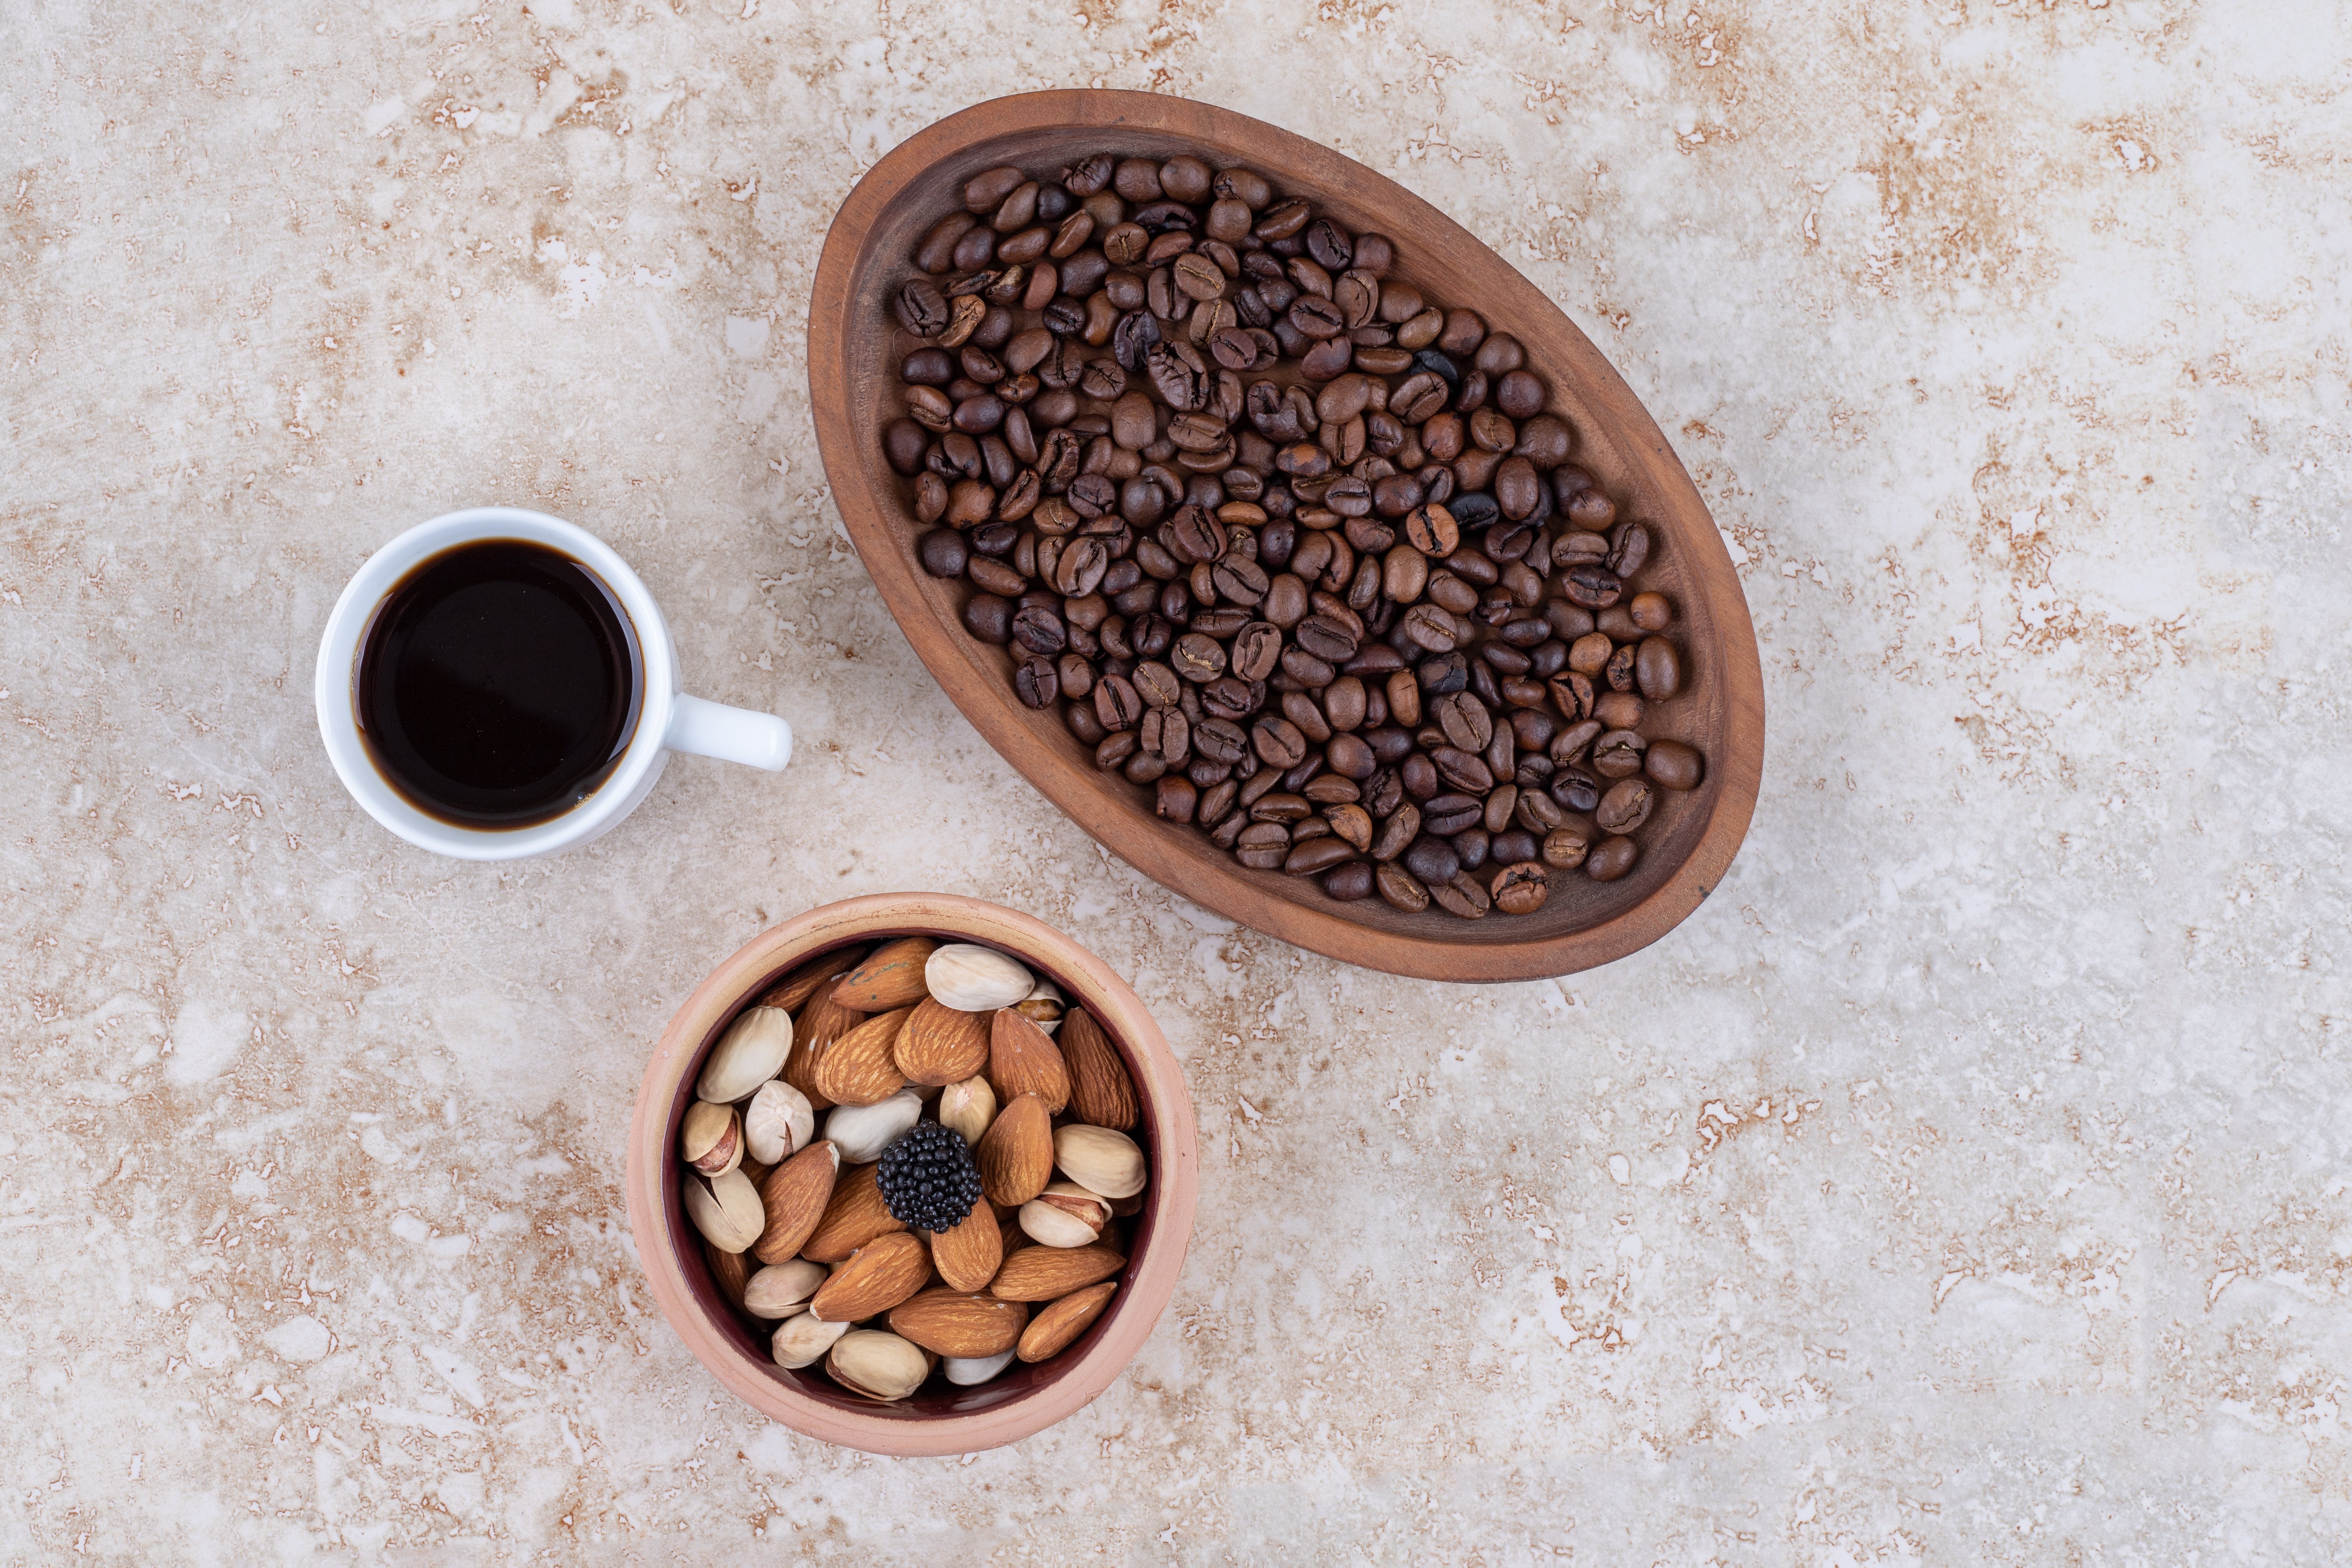 bowl-assorted-nuts-tray-coffee-beans-cup-black-coffee